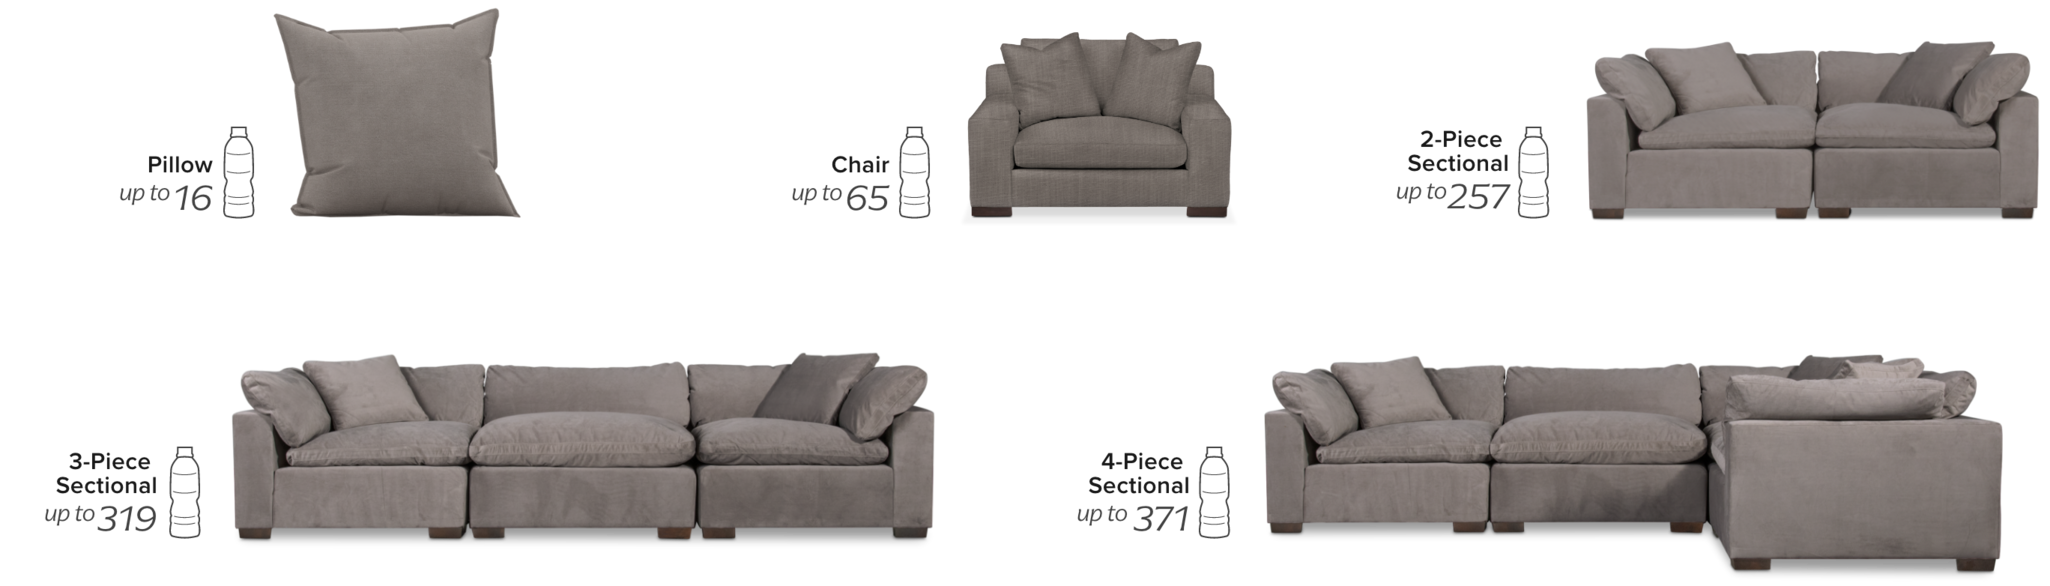 Pillow up to 16 bottles. Chair up to 65 bottles. 2-piece sectional up to 257 bottles. 3-piece sectional up to 319 bottles. 4-piece sectional up to 371 bottles.